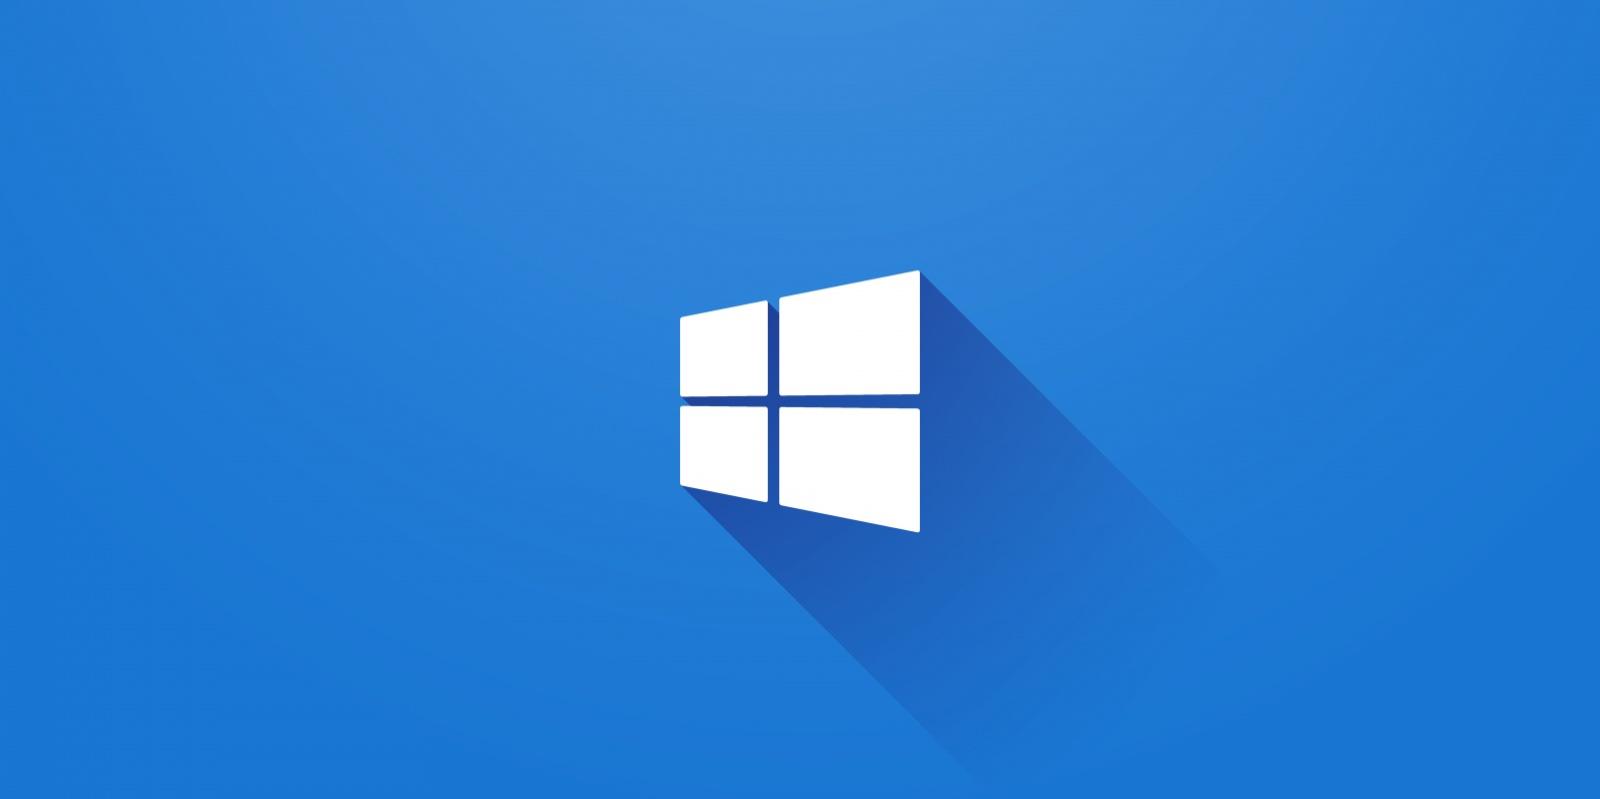 Windows Zero Day With Bad Patch Gets New Public Exploit Code